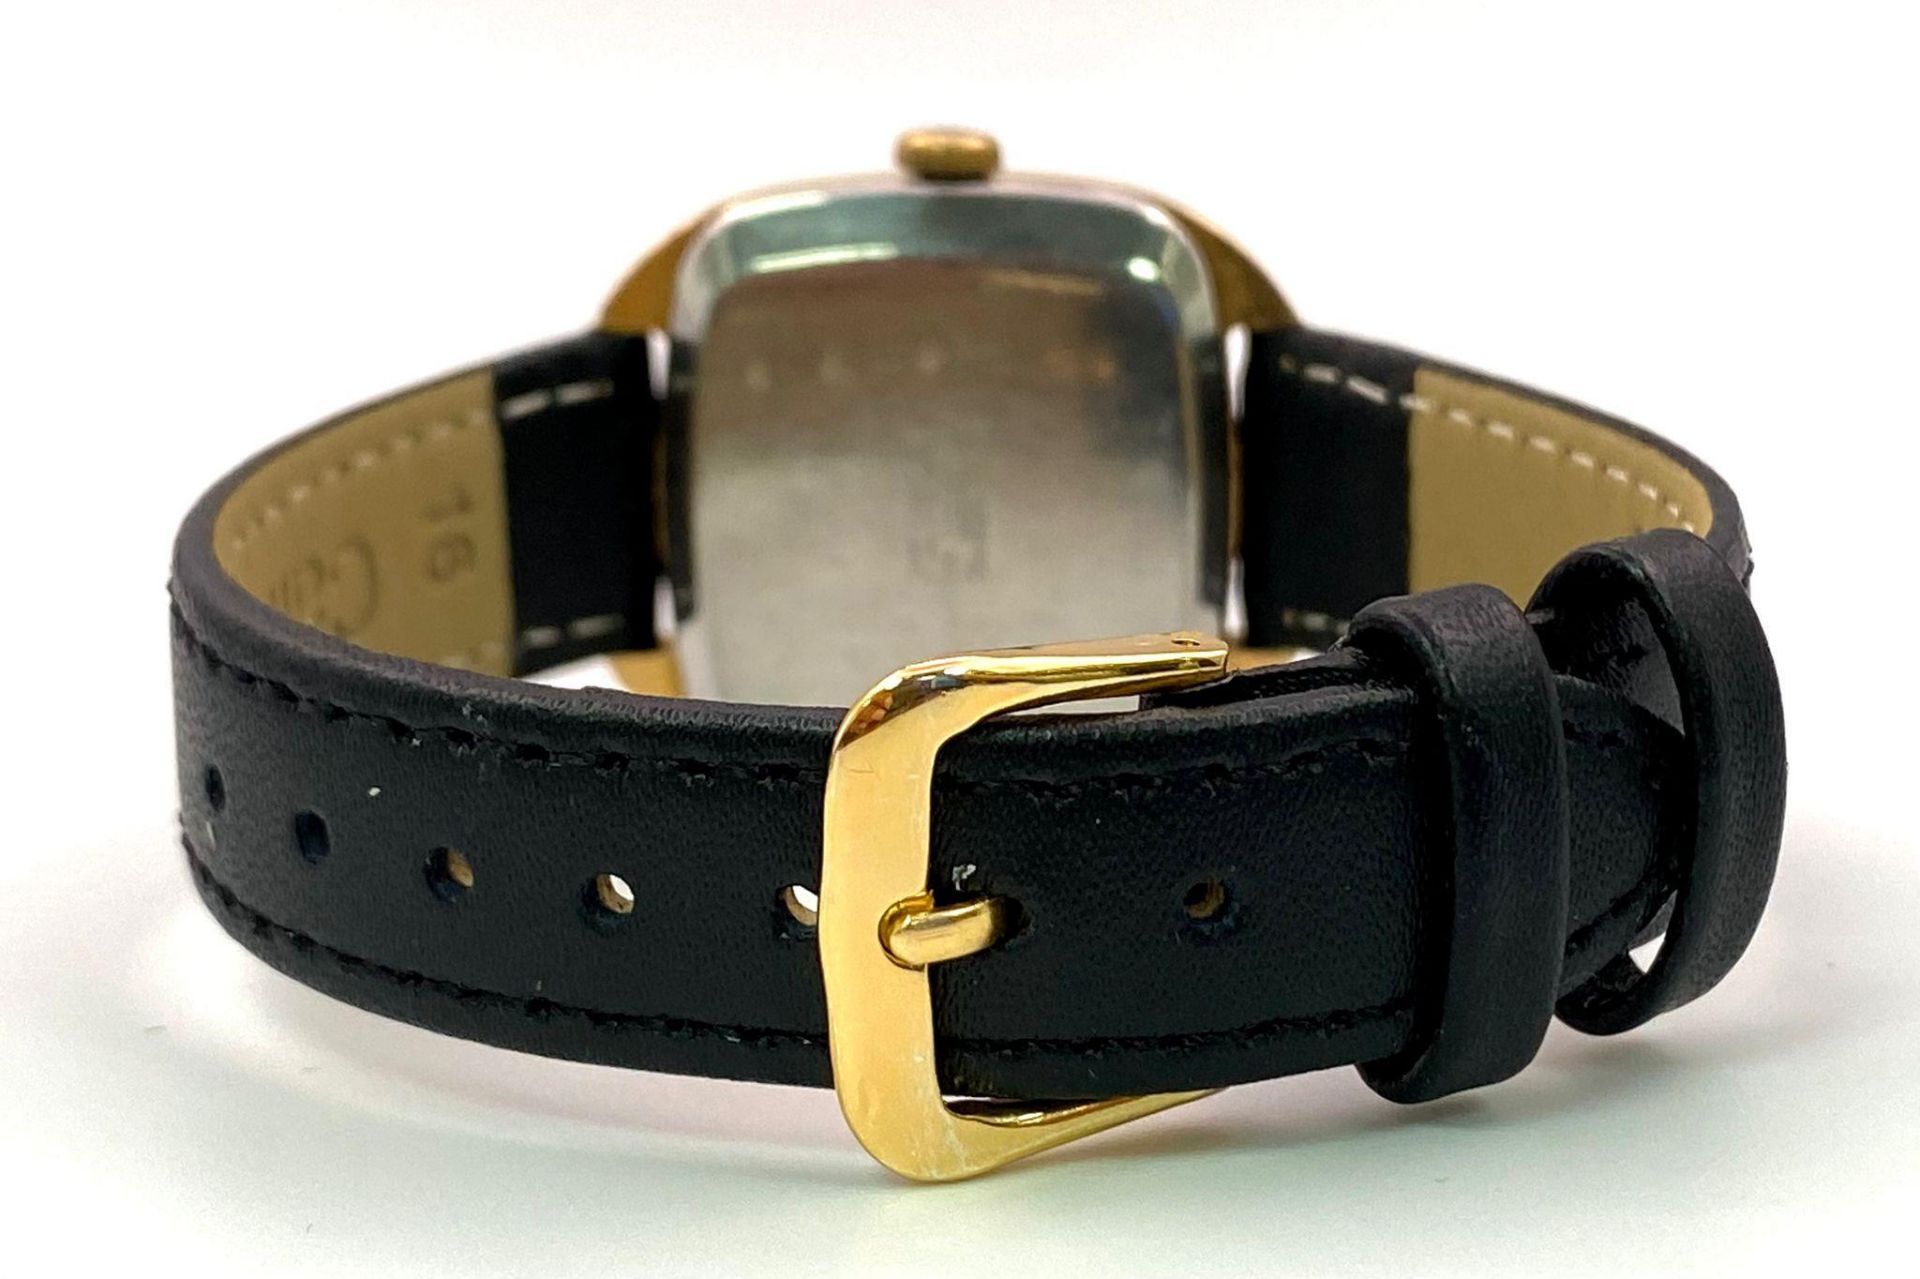 A Vintage 1950s Oris Gents Mechanical Watch. Black leather strap. Gold plated square case - 31mm. - Image 6 of 11